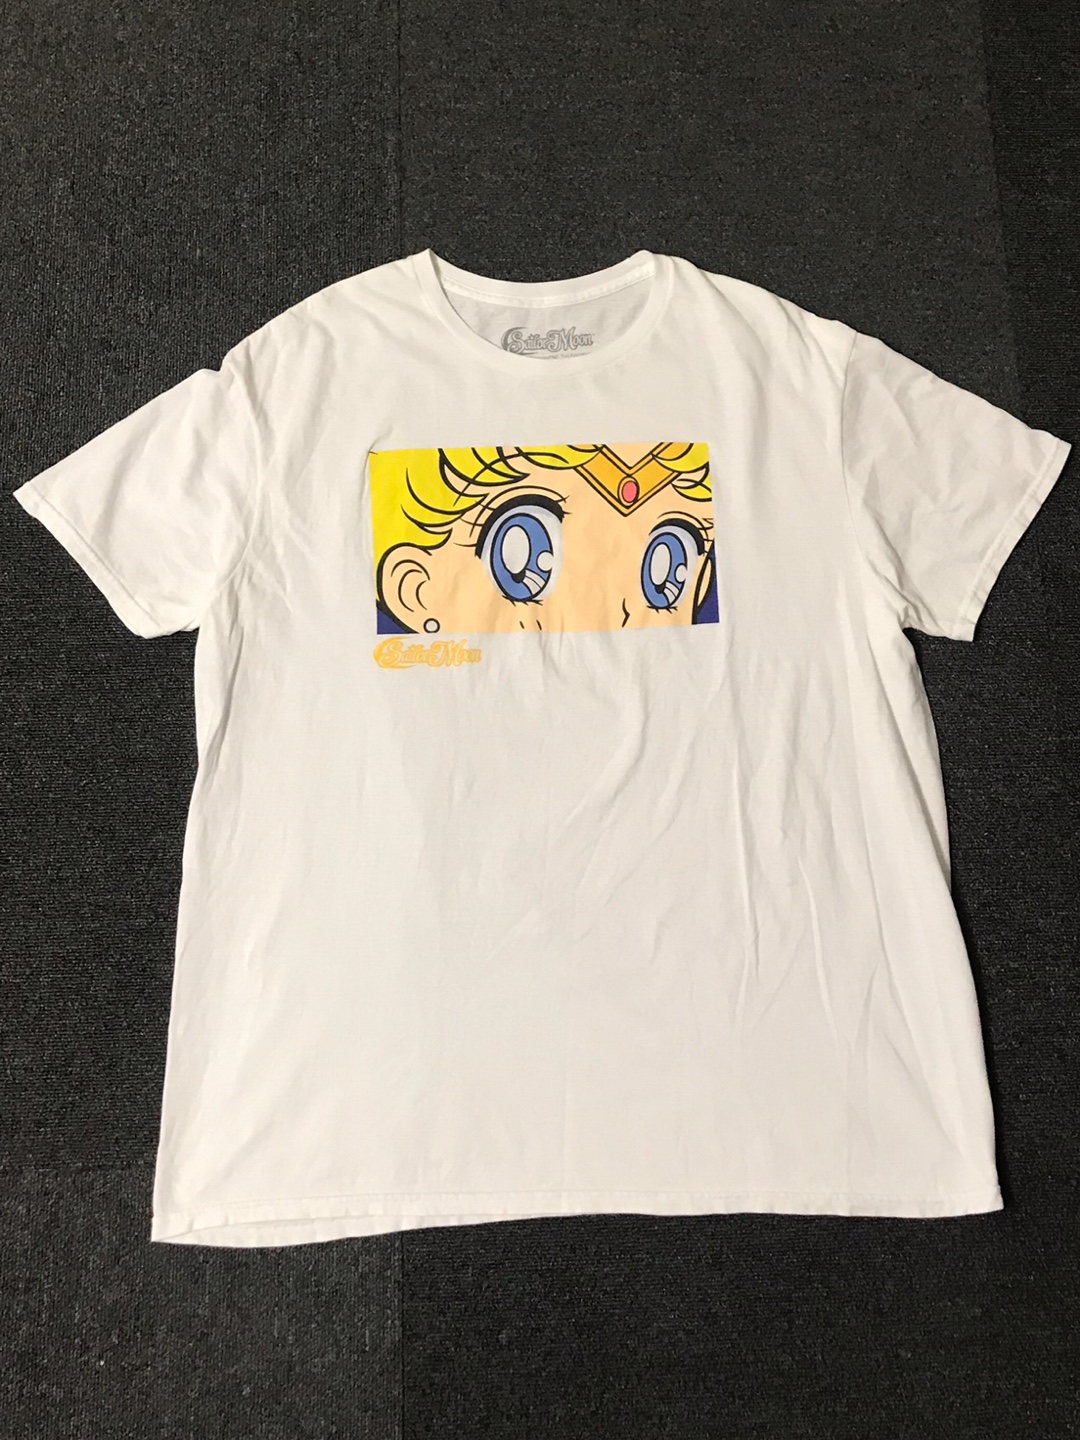 official licensed sailor moon tee (XL size, ~105 추천)